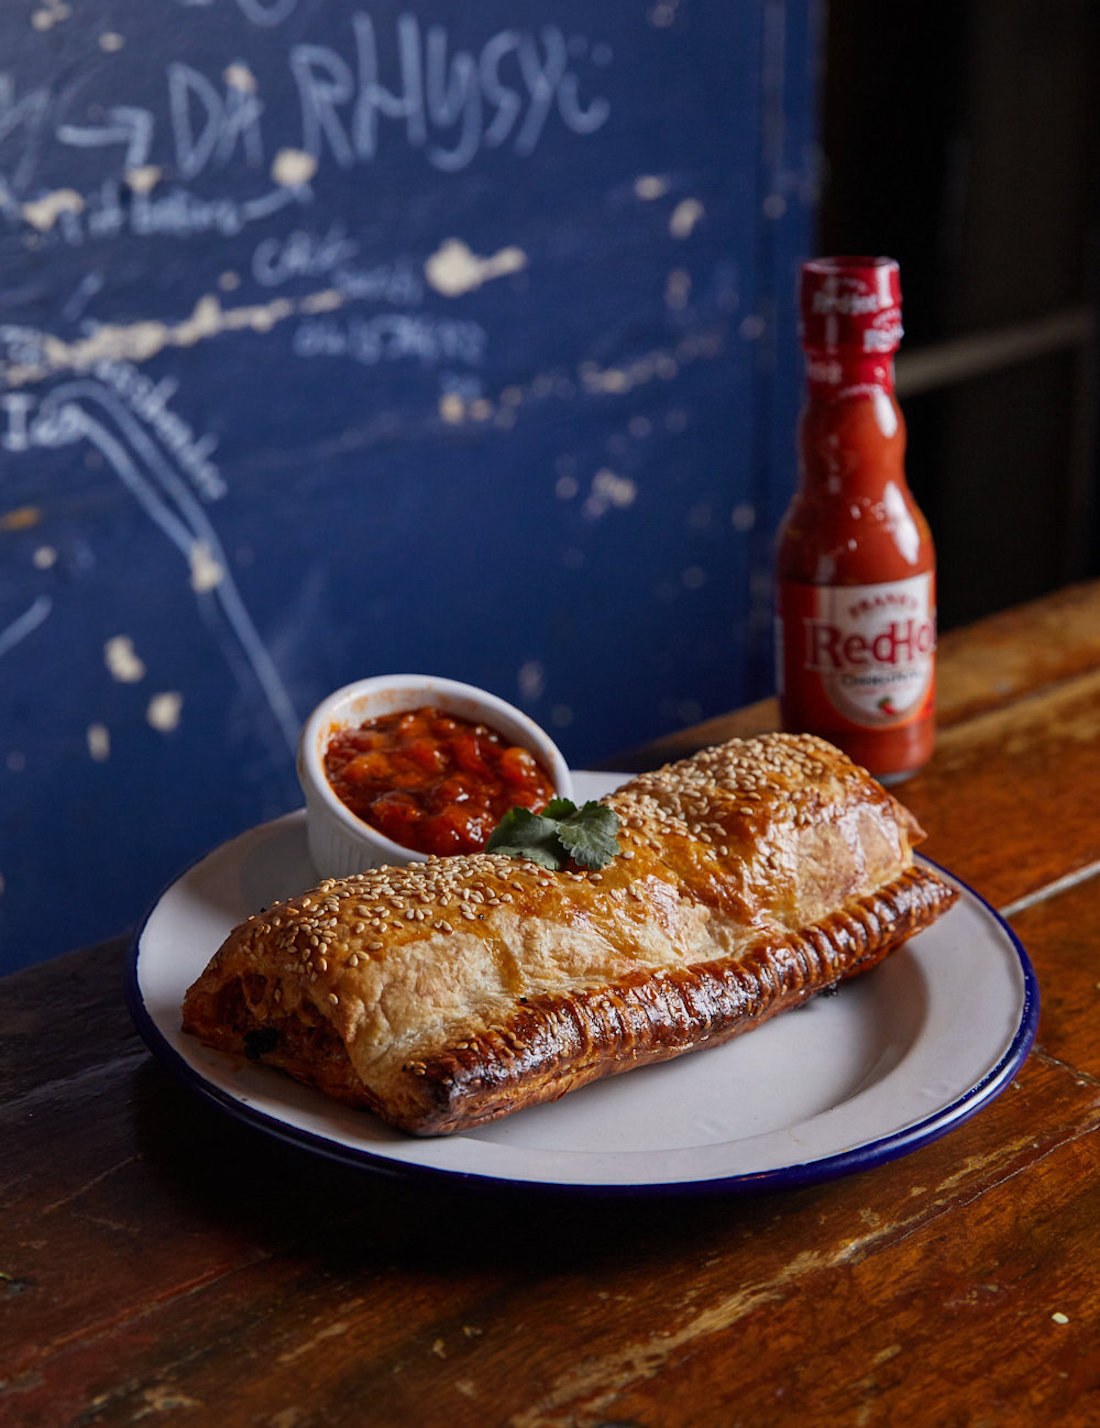 A glorious golden sausage roll sitting next to Frank's RedHot Sauce.